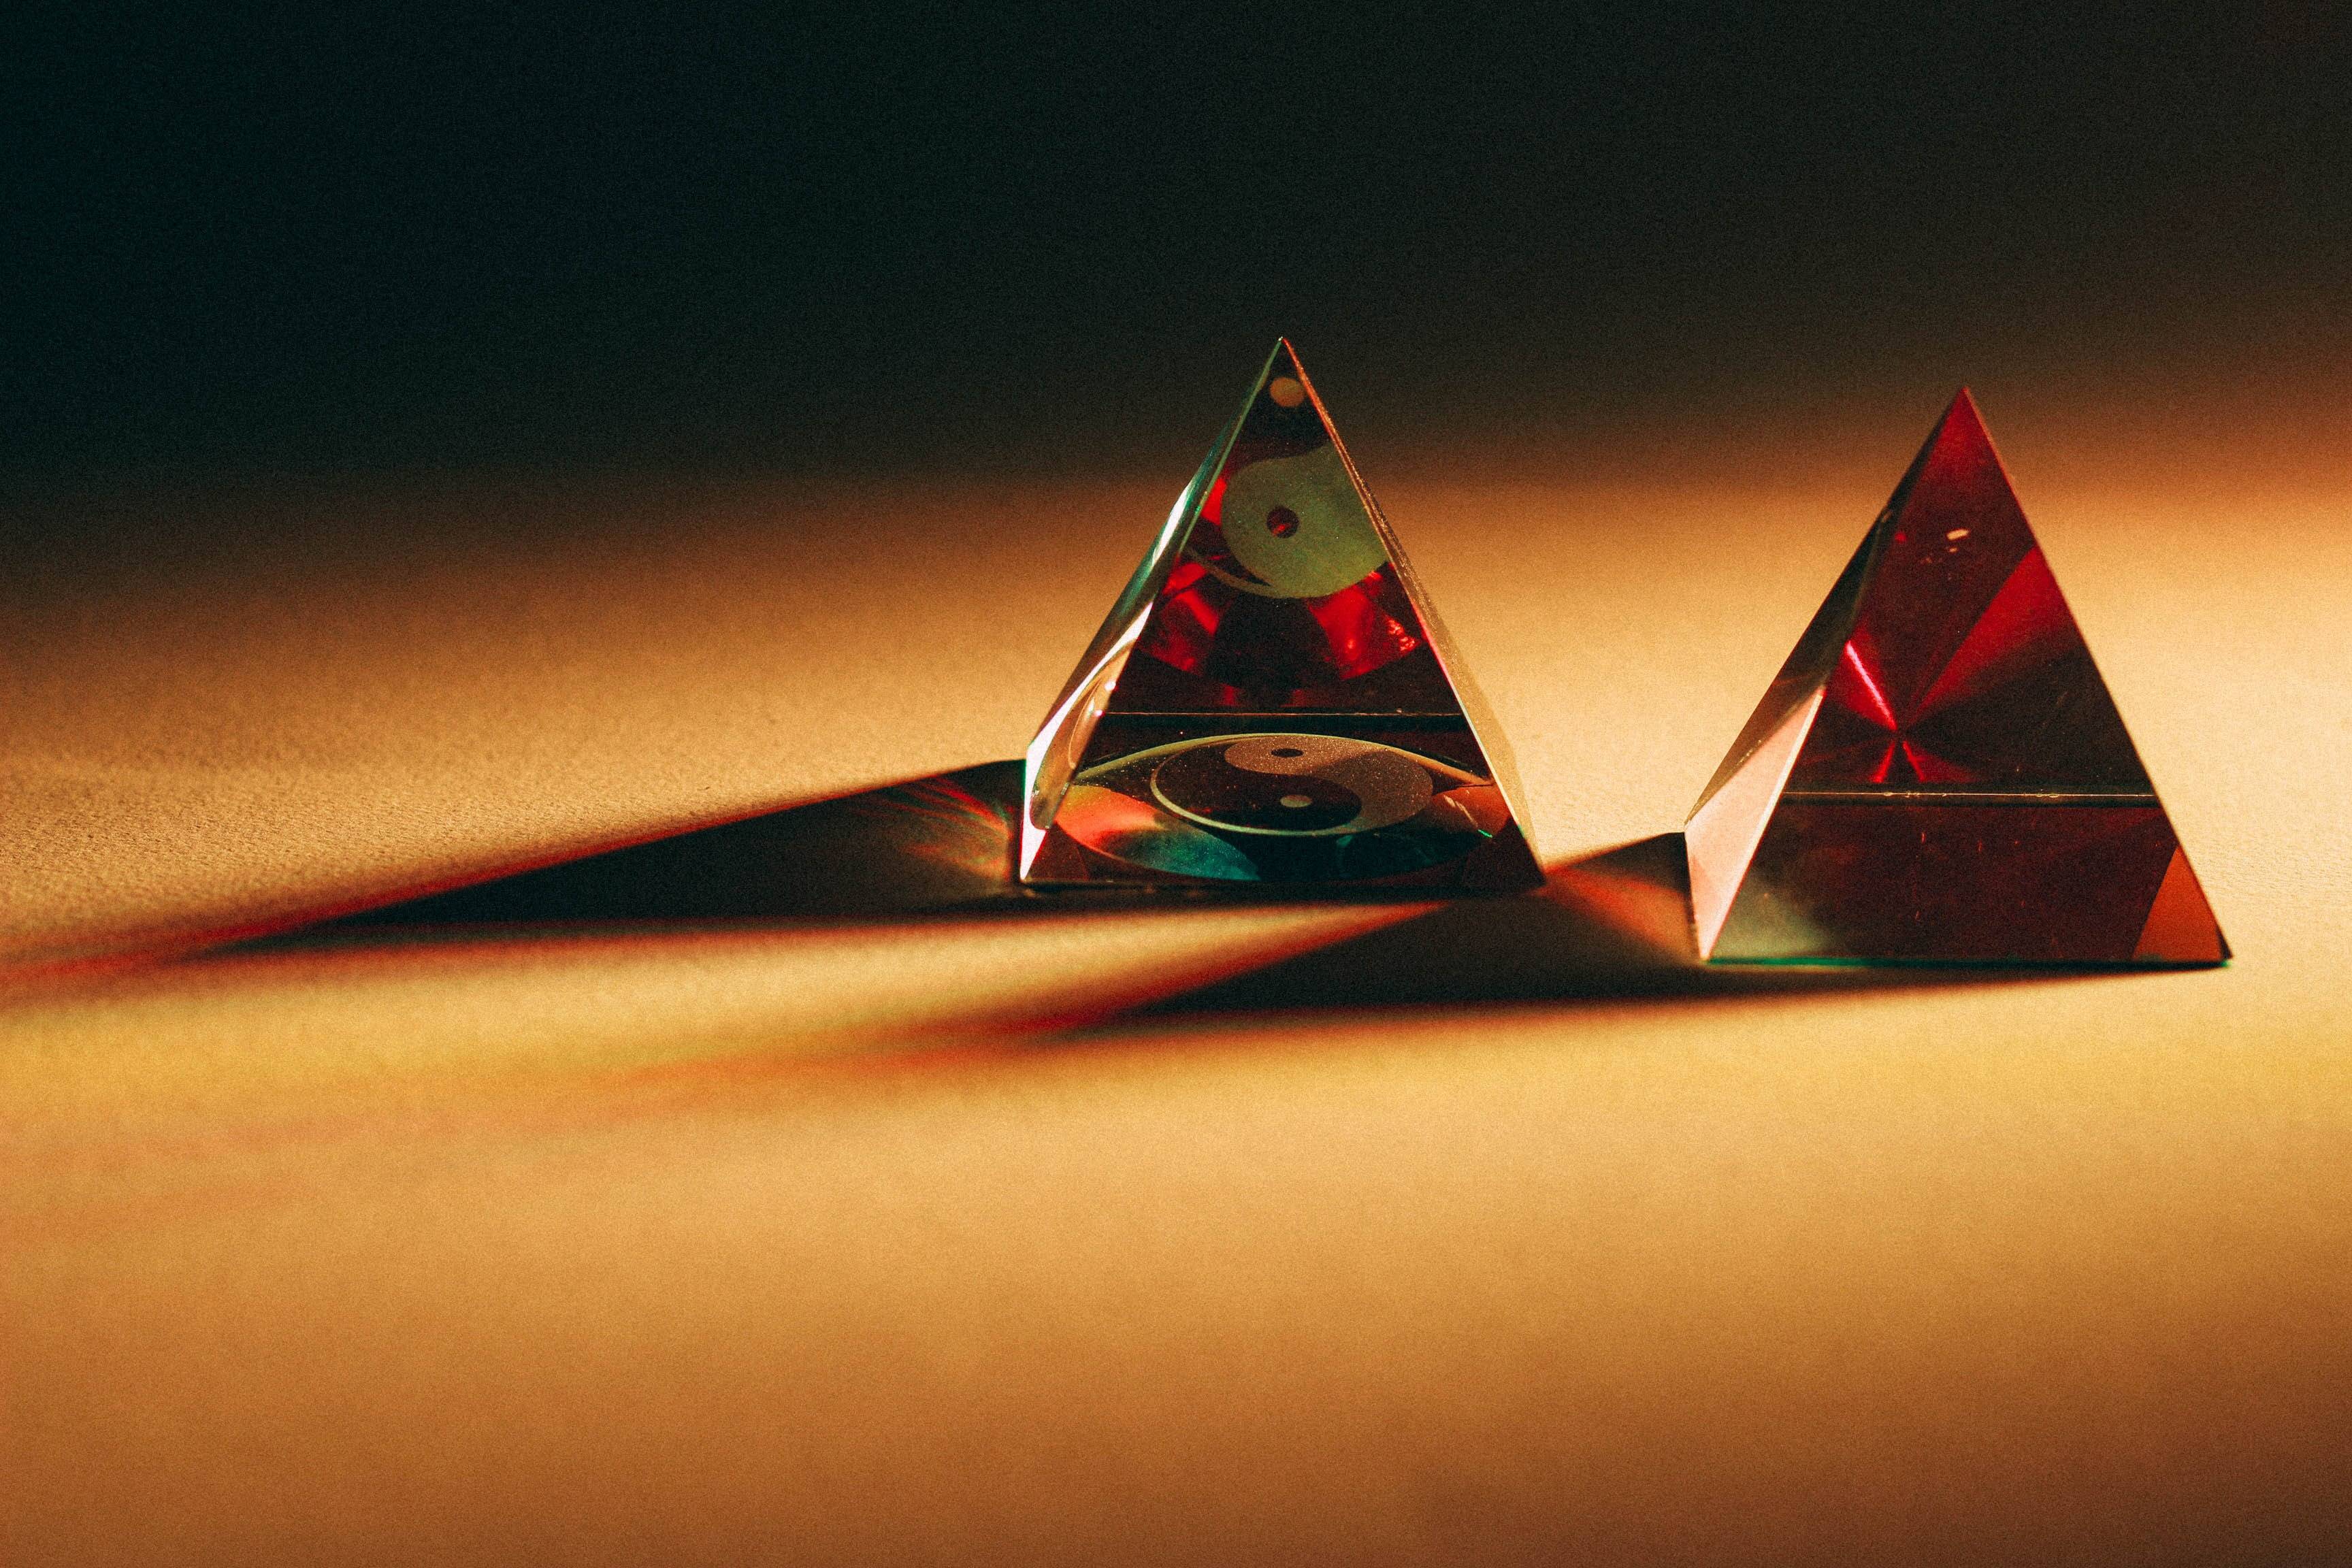 Why Triangular Prisms Are the Building Blocks of Optics?